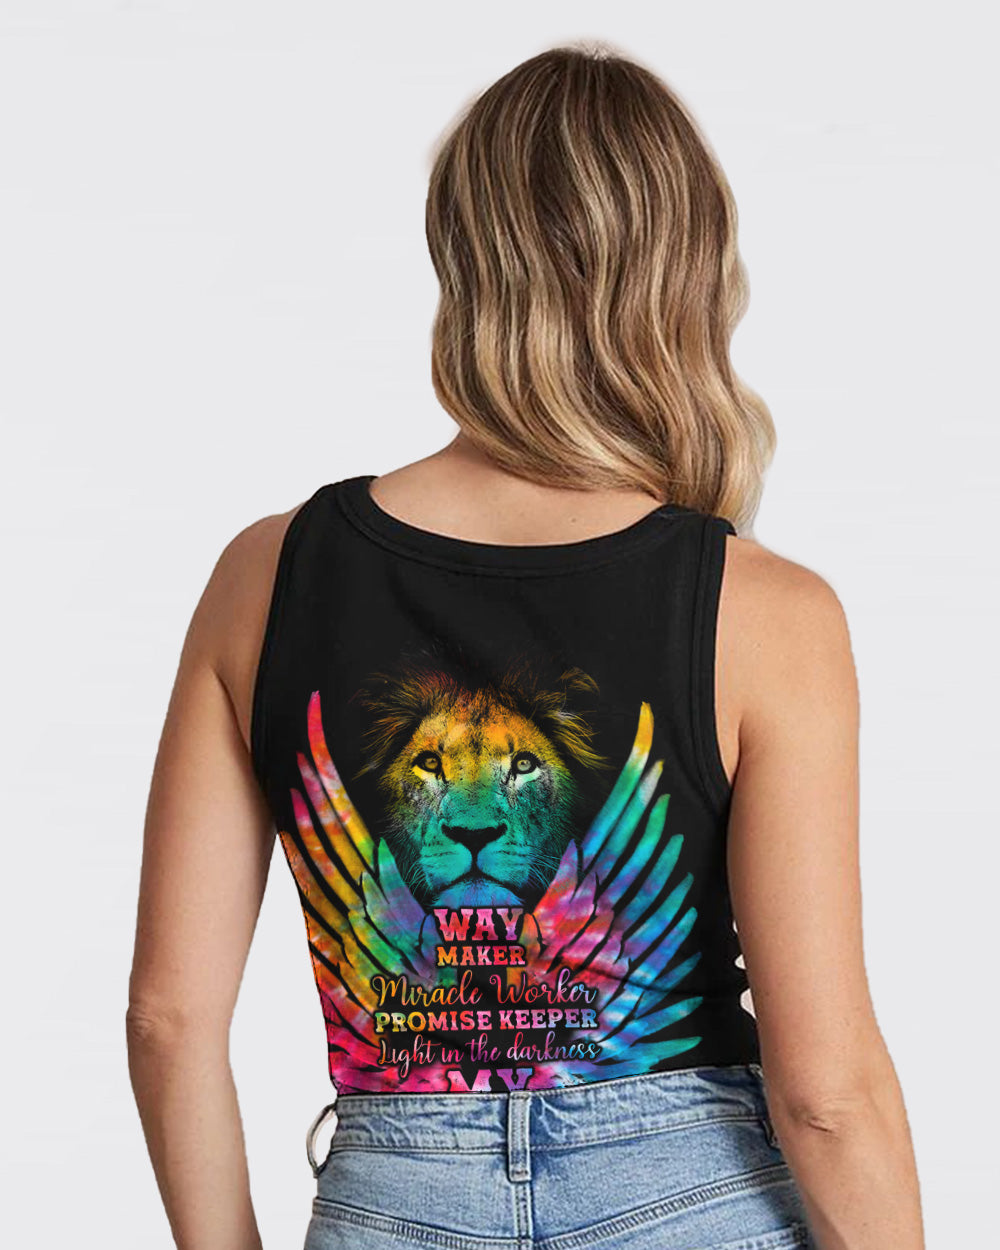 Way Maker Miracle Worker Promise Keeper Life In The Darkness Colorful Lion Wings Women's Christian Tanks